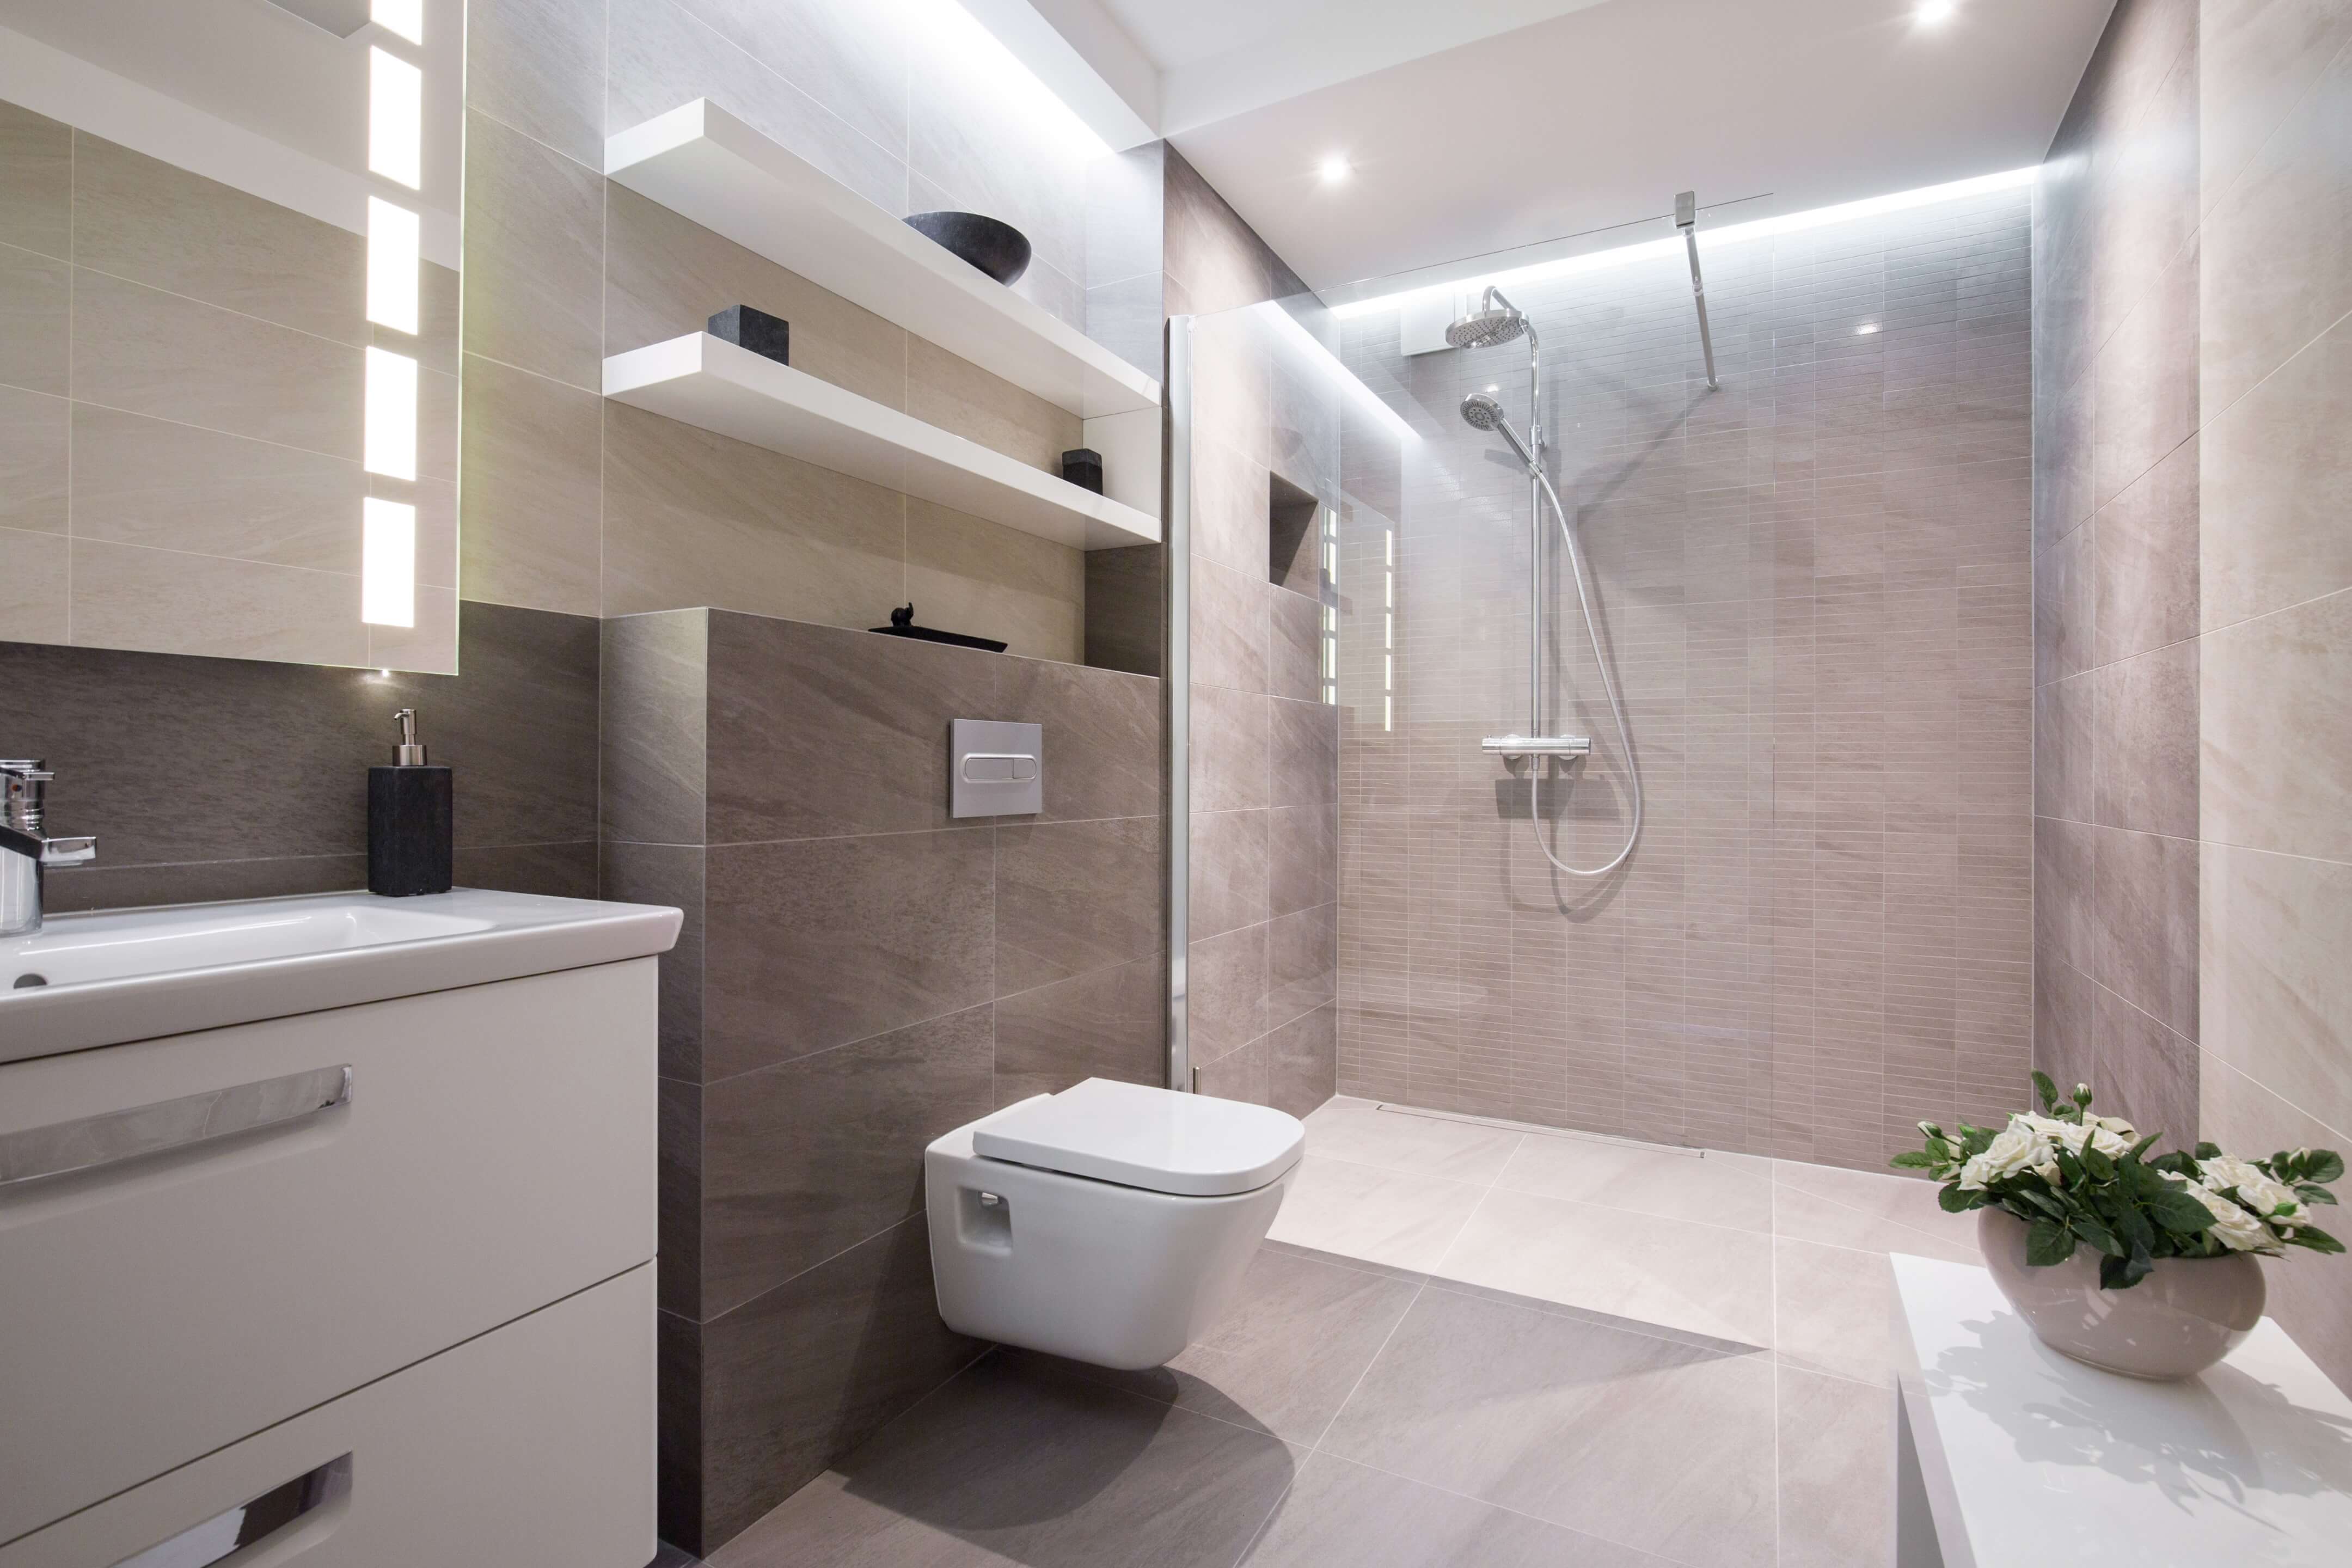 local bathroom fitters wandsworth